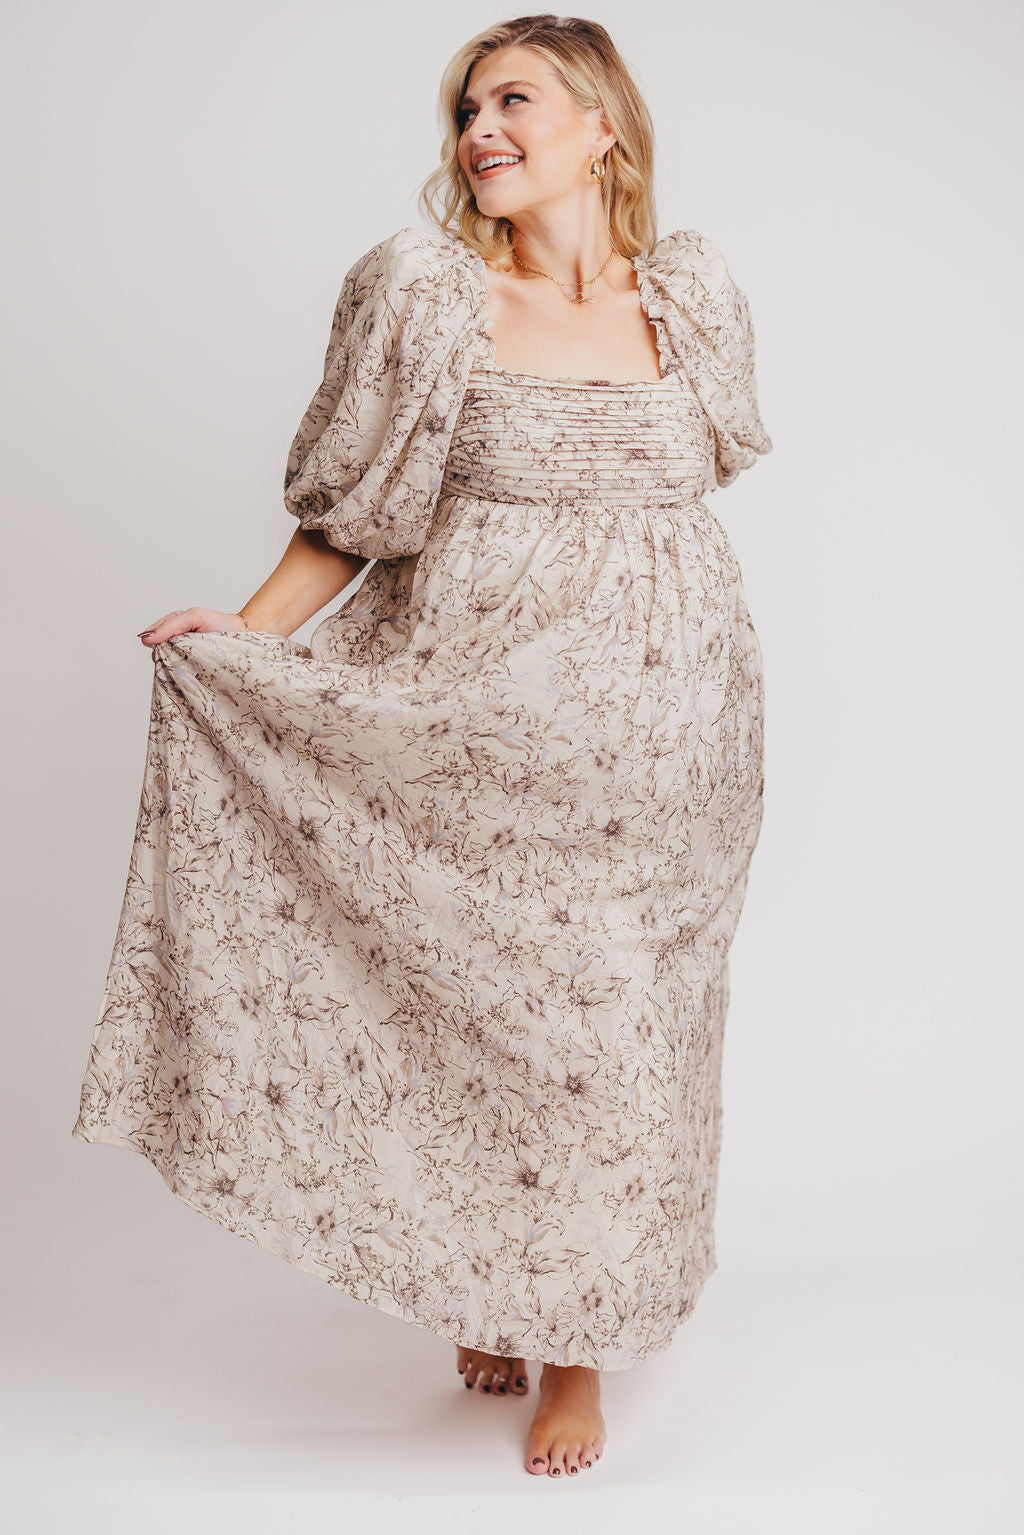 Melody Maxi Dress with Pleats and Bow Detail in Brown and Blue Floral - Bump Friendly & Inclusive Sizing (S-3XL)